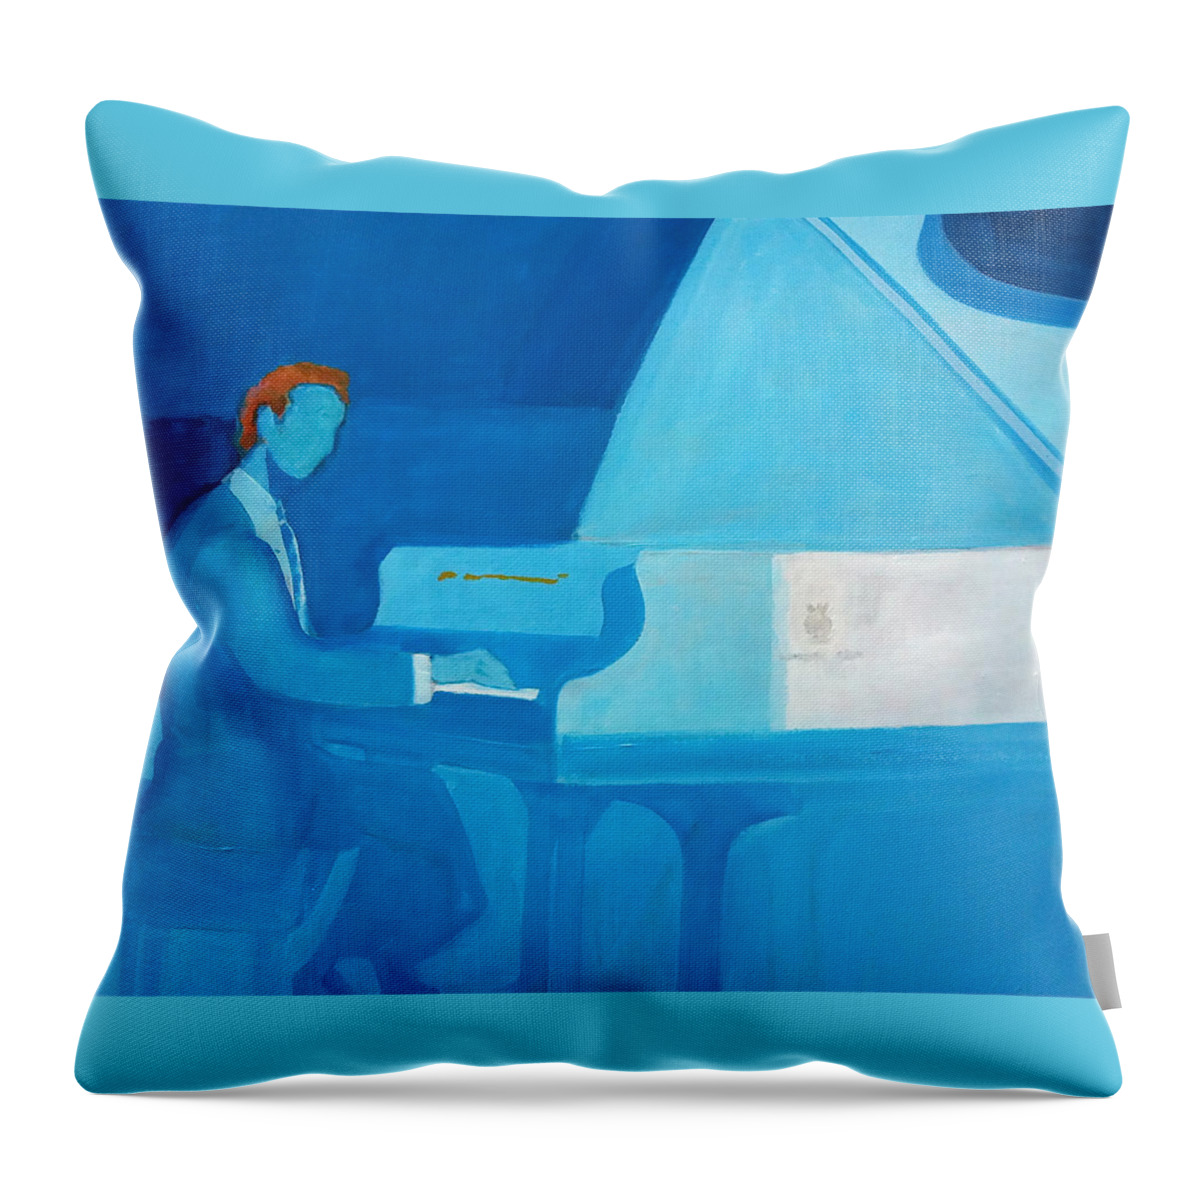 Blue Piano Throw Pillow featuring the painting Justin Levitt Steinway Piano Blue by Suzanne Giuriati Cerny